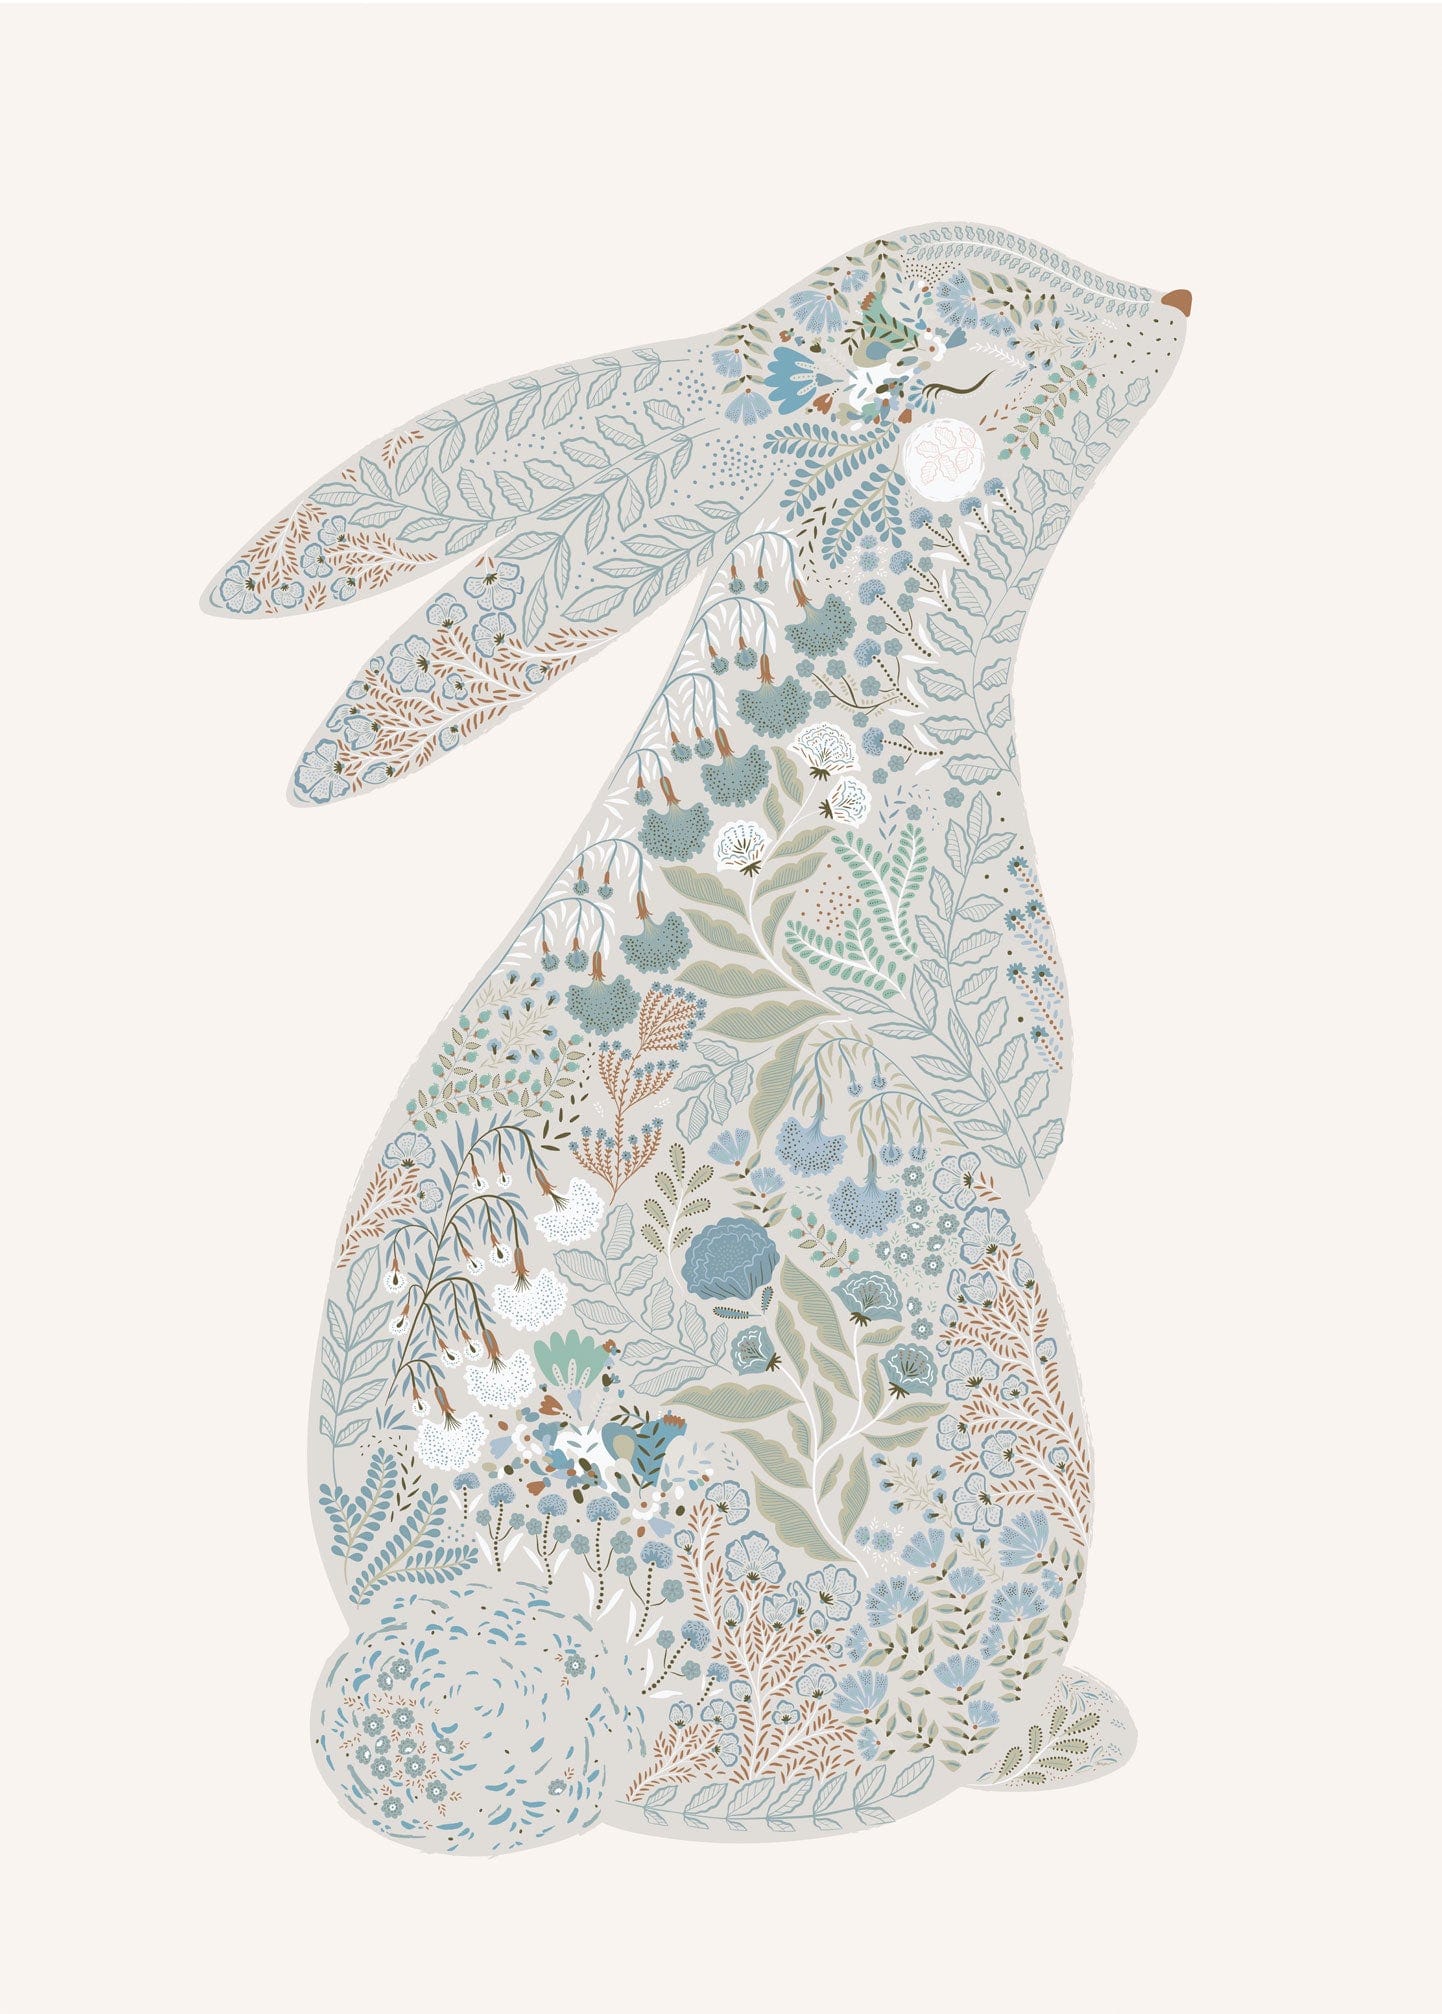 Floral inspired blue bunny wall hanging with oak wood apparatus